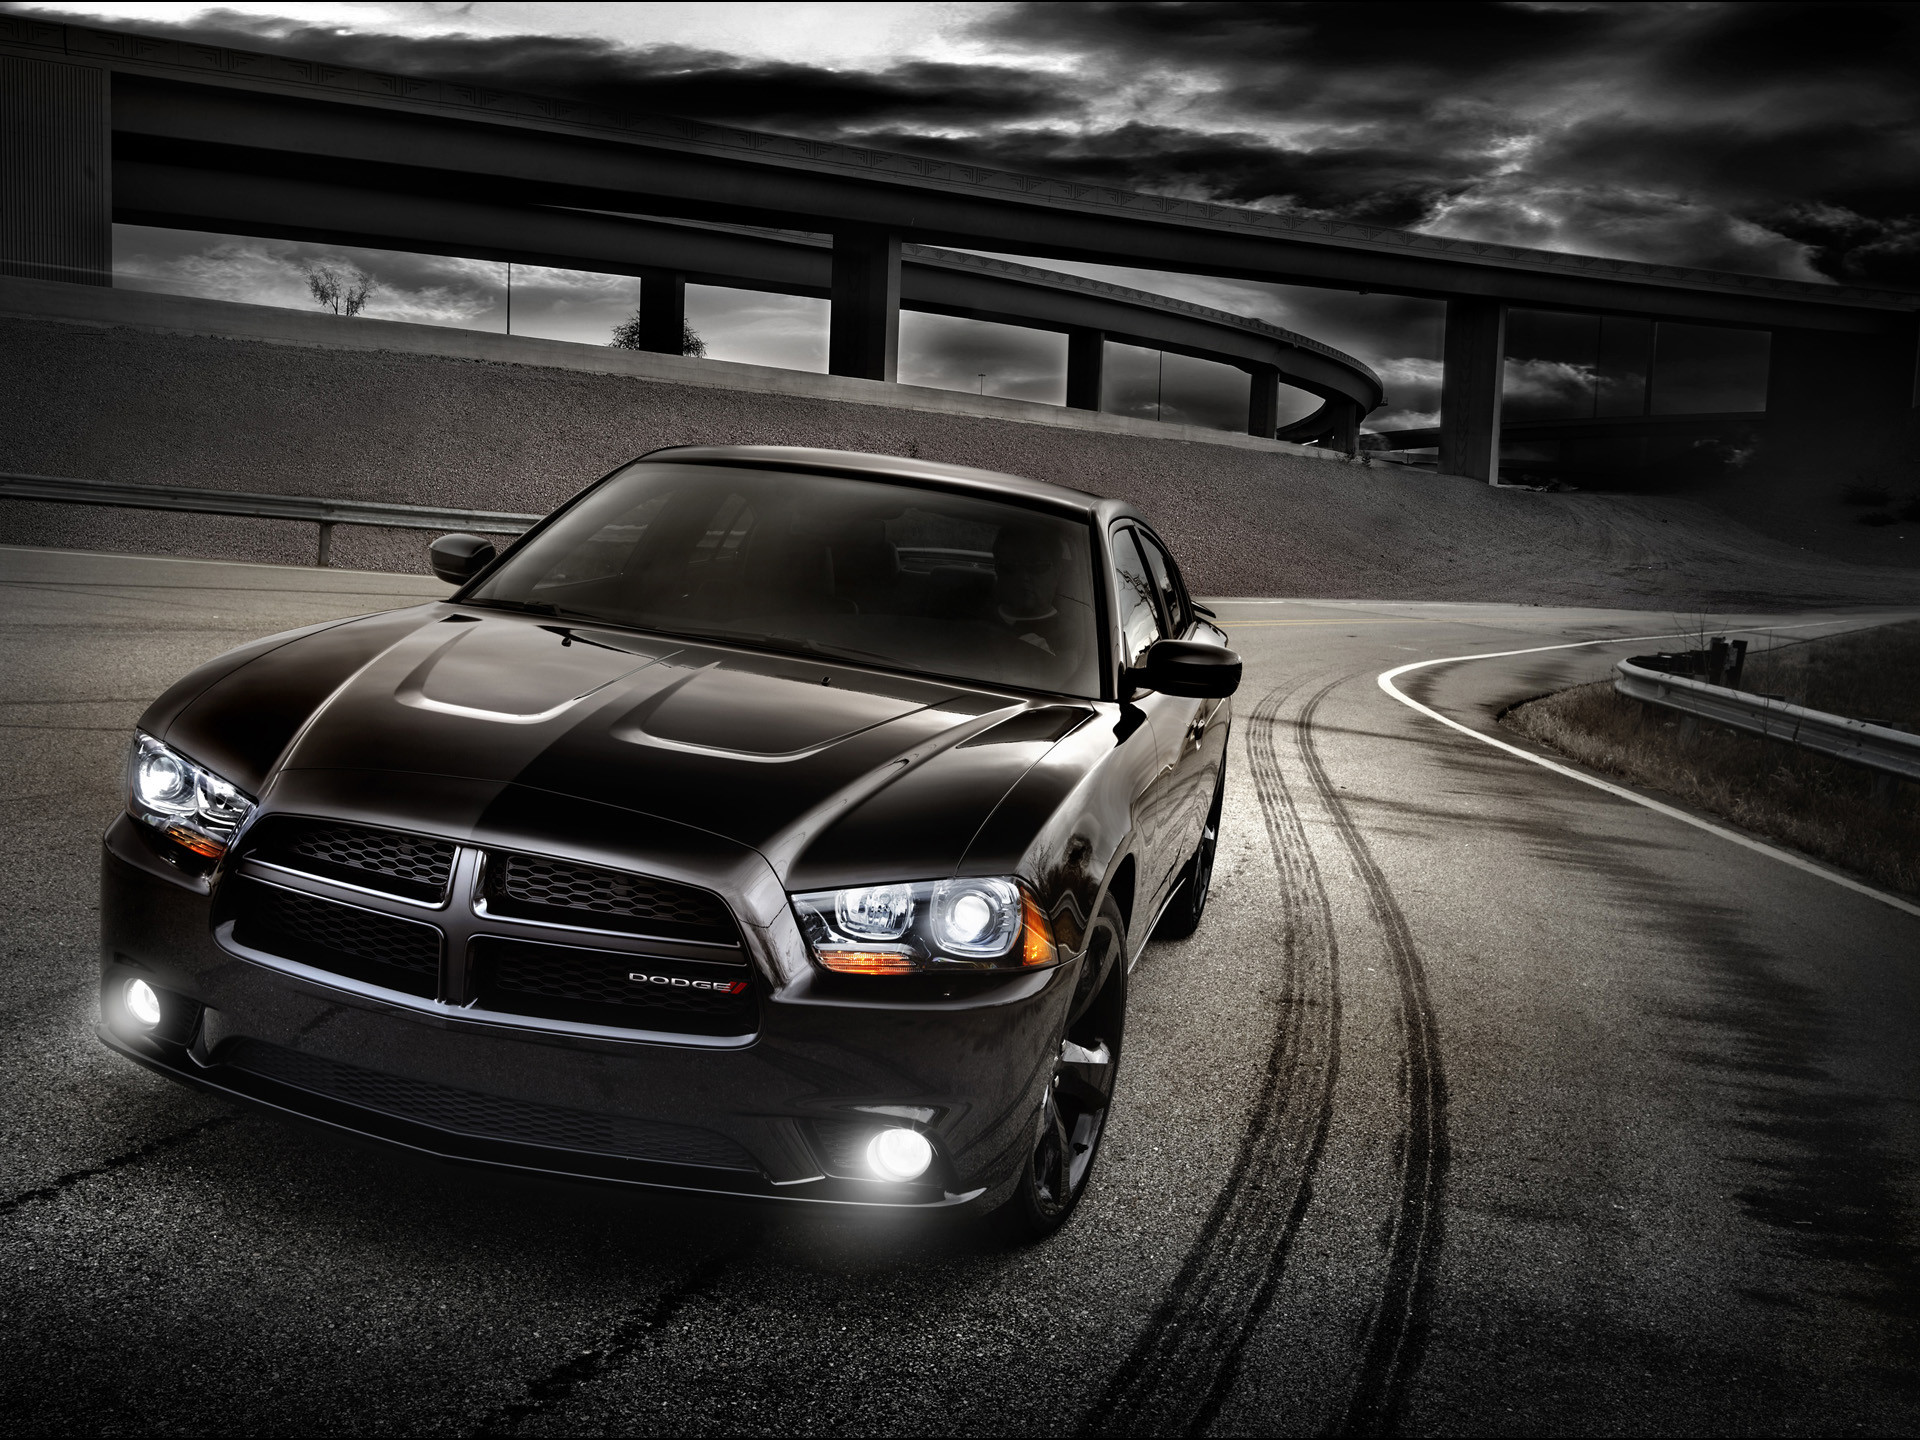 1920x1440 2012 Dodge Charger Blacktop Front Angle  Wallpaper Source Â· Dodge  Charger Wallpapers. Dodge Charger Wallpapers